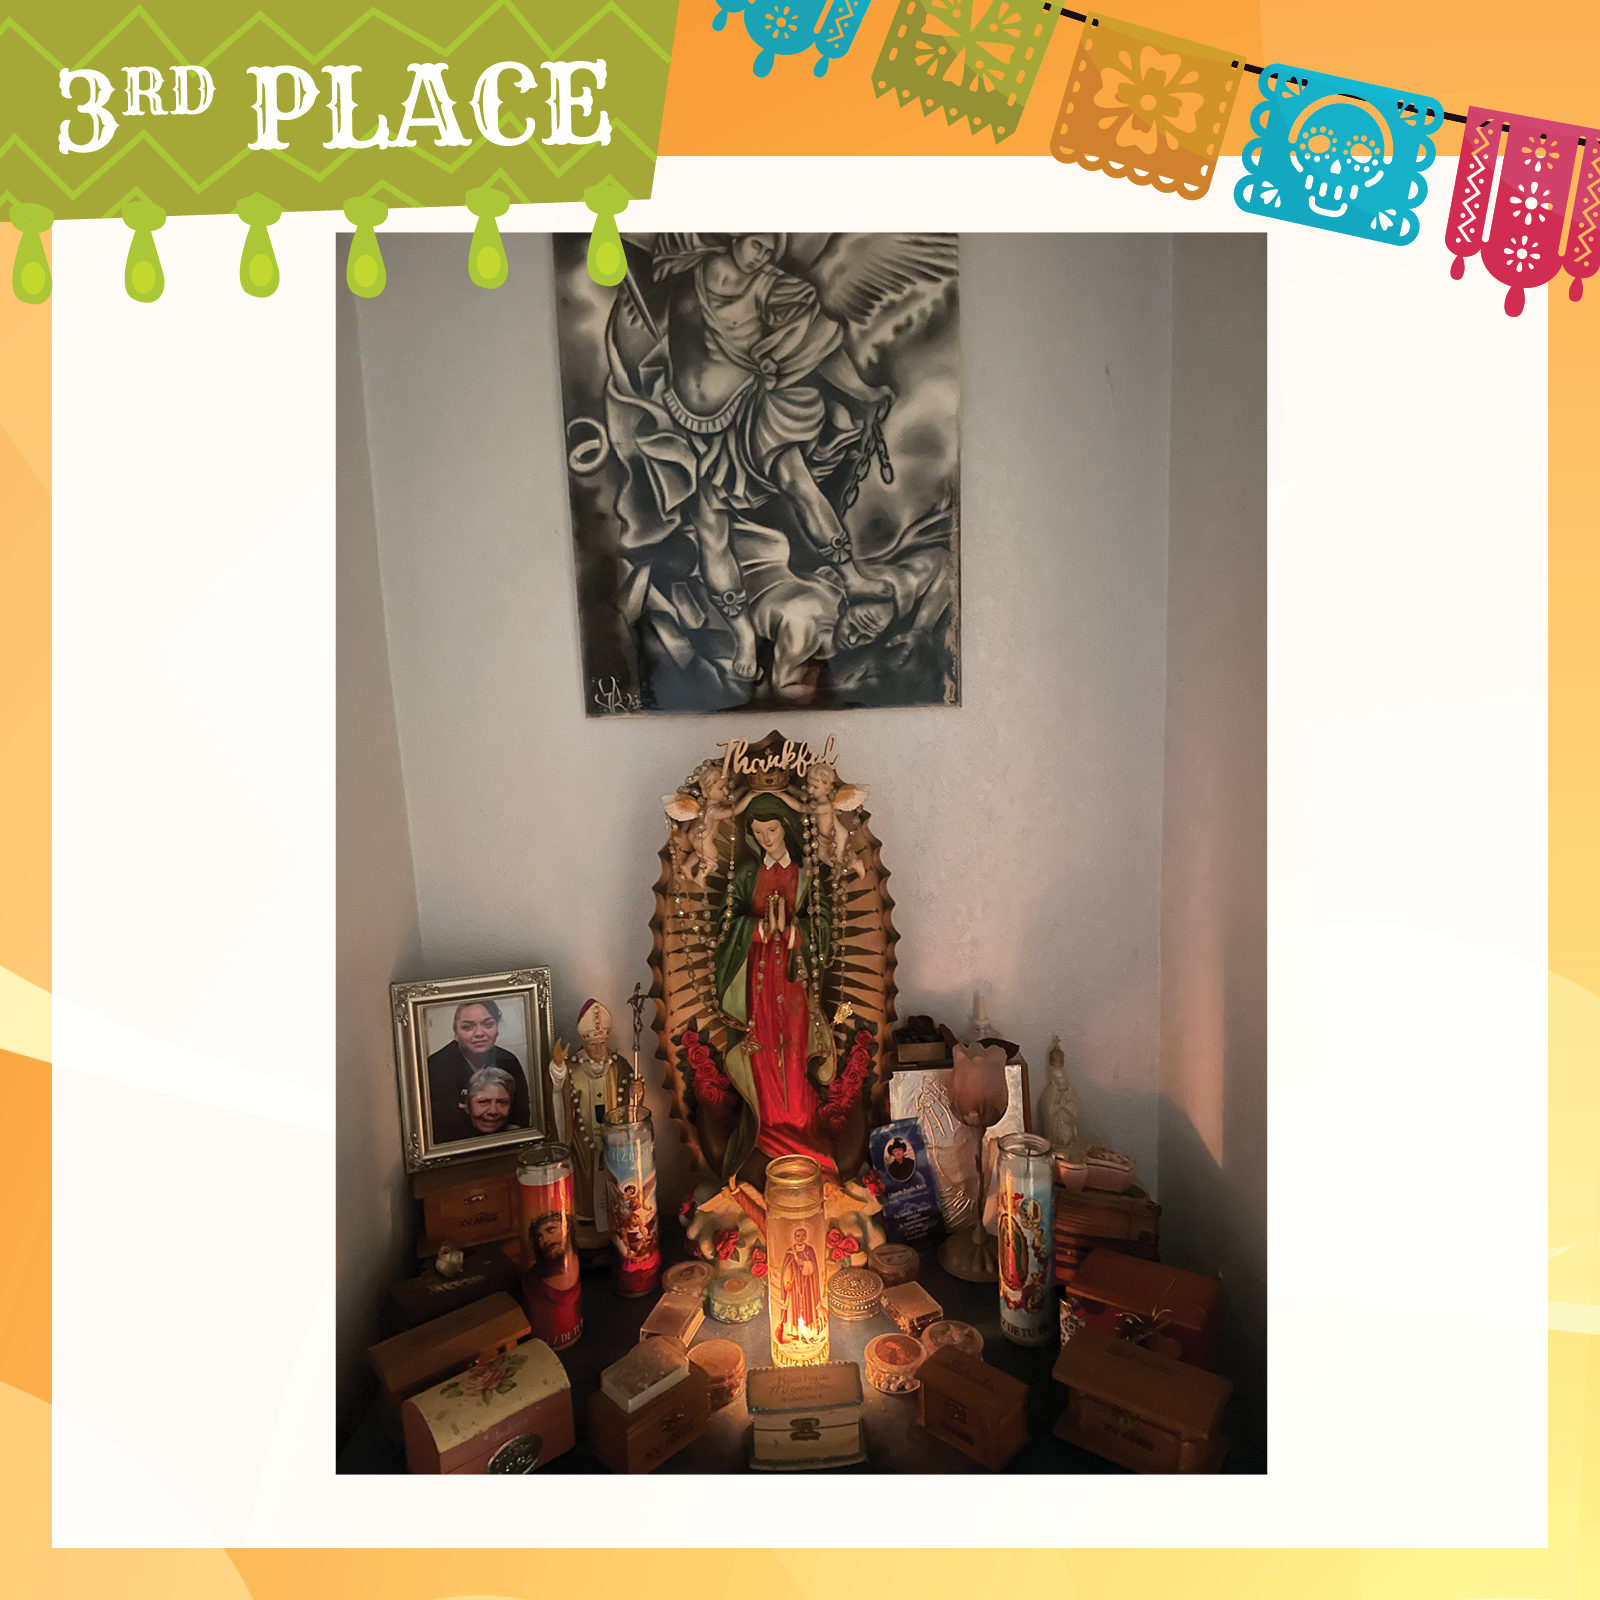 photo graph of dia de los muertos alter, with graphite drawing of male angel holding down man with his foot and the alter below with a figure of Mary, holy candles, a figure of the pope, a photo of two women and an array of small boxes